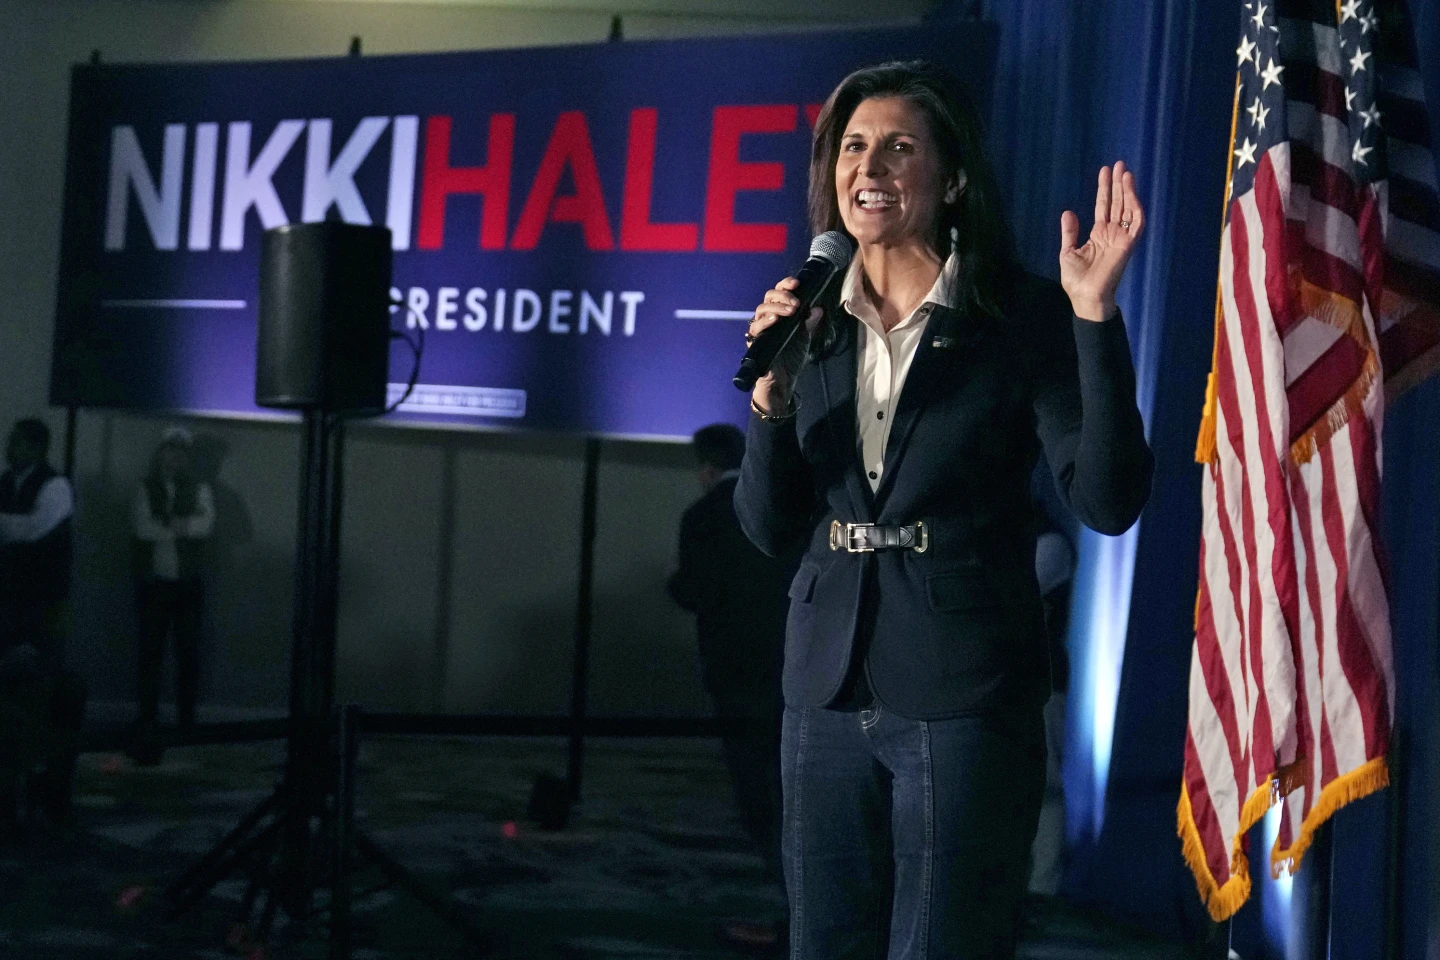 Nikki Haley Stomped by ‘None of These Candidates’ Option in Nevada GOP Primary